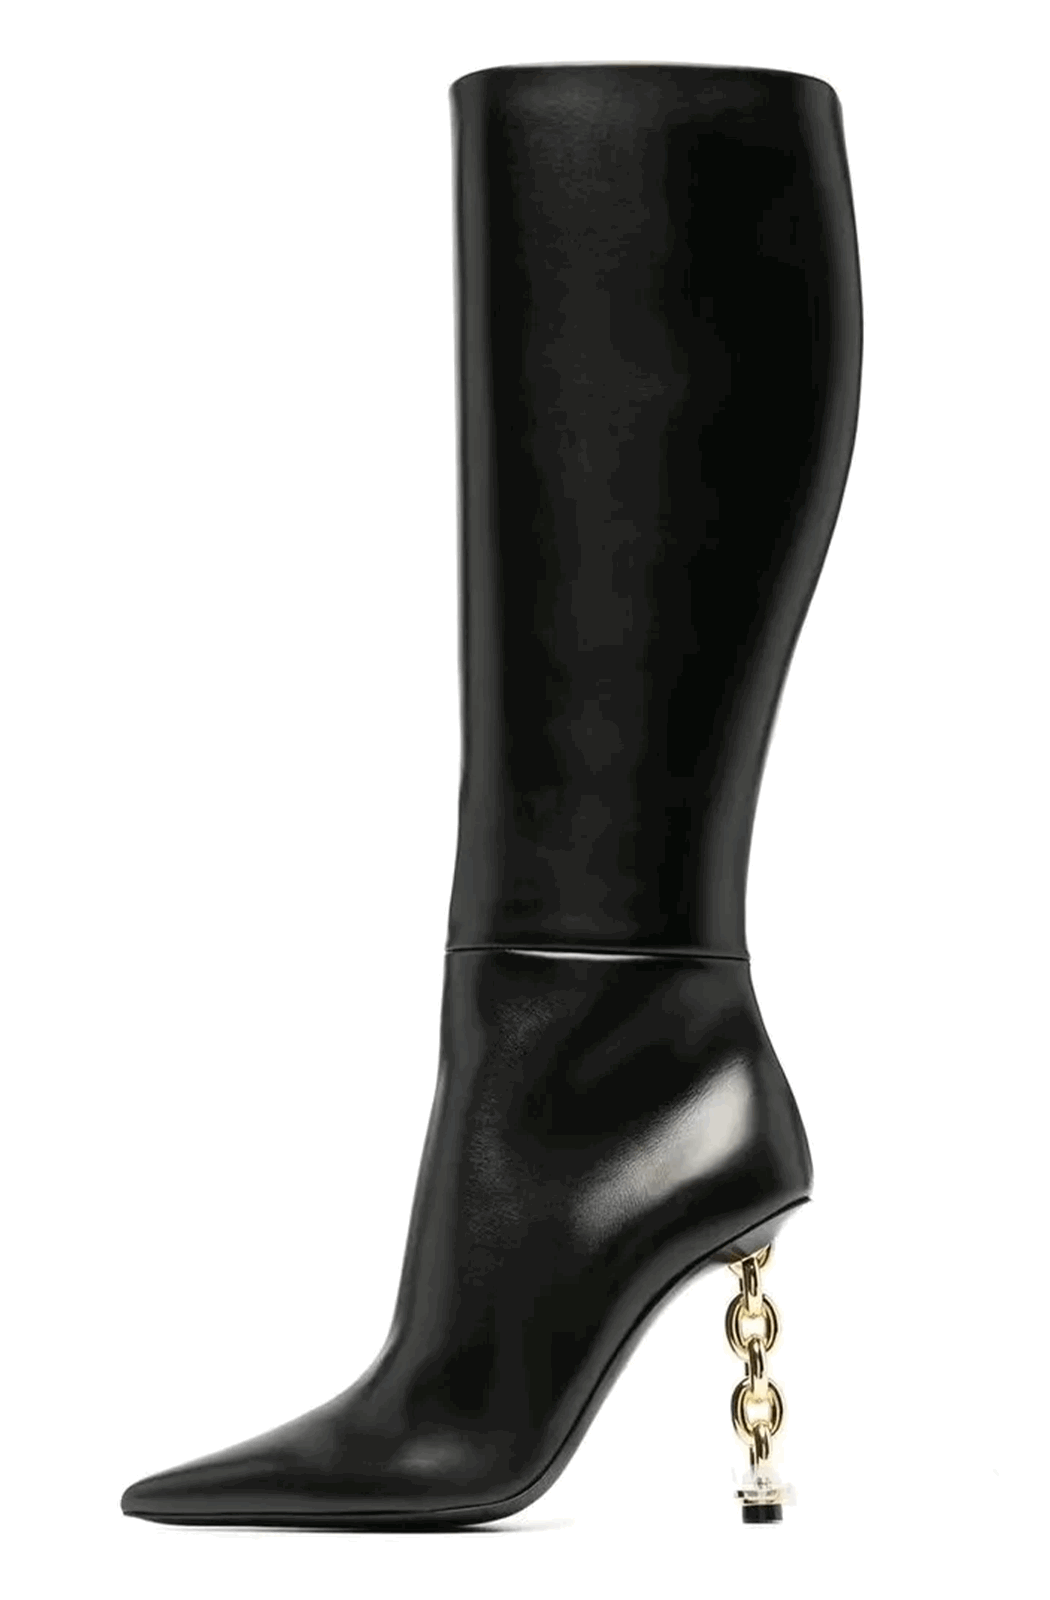 Black knee length boots with chain heels